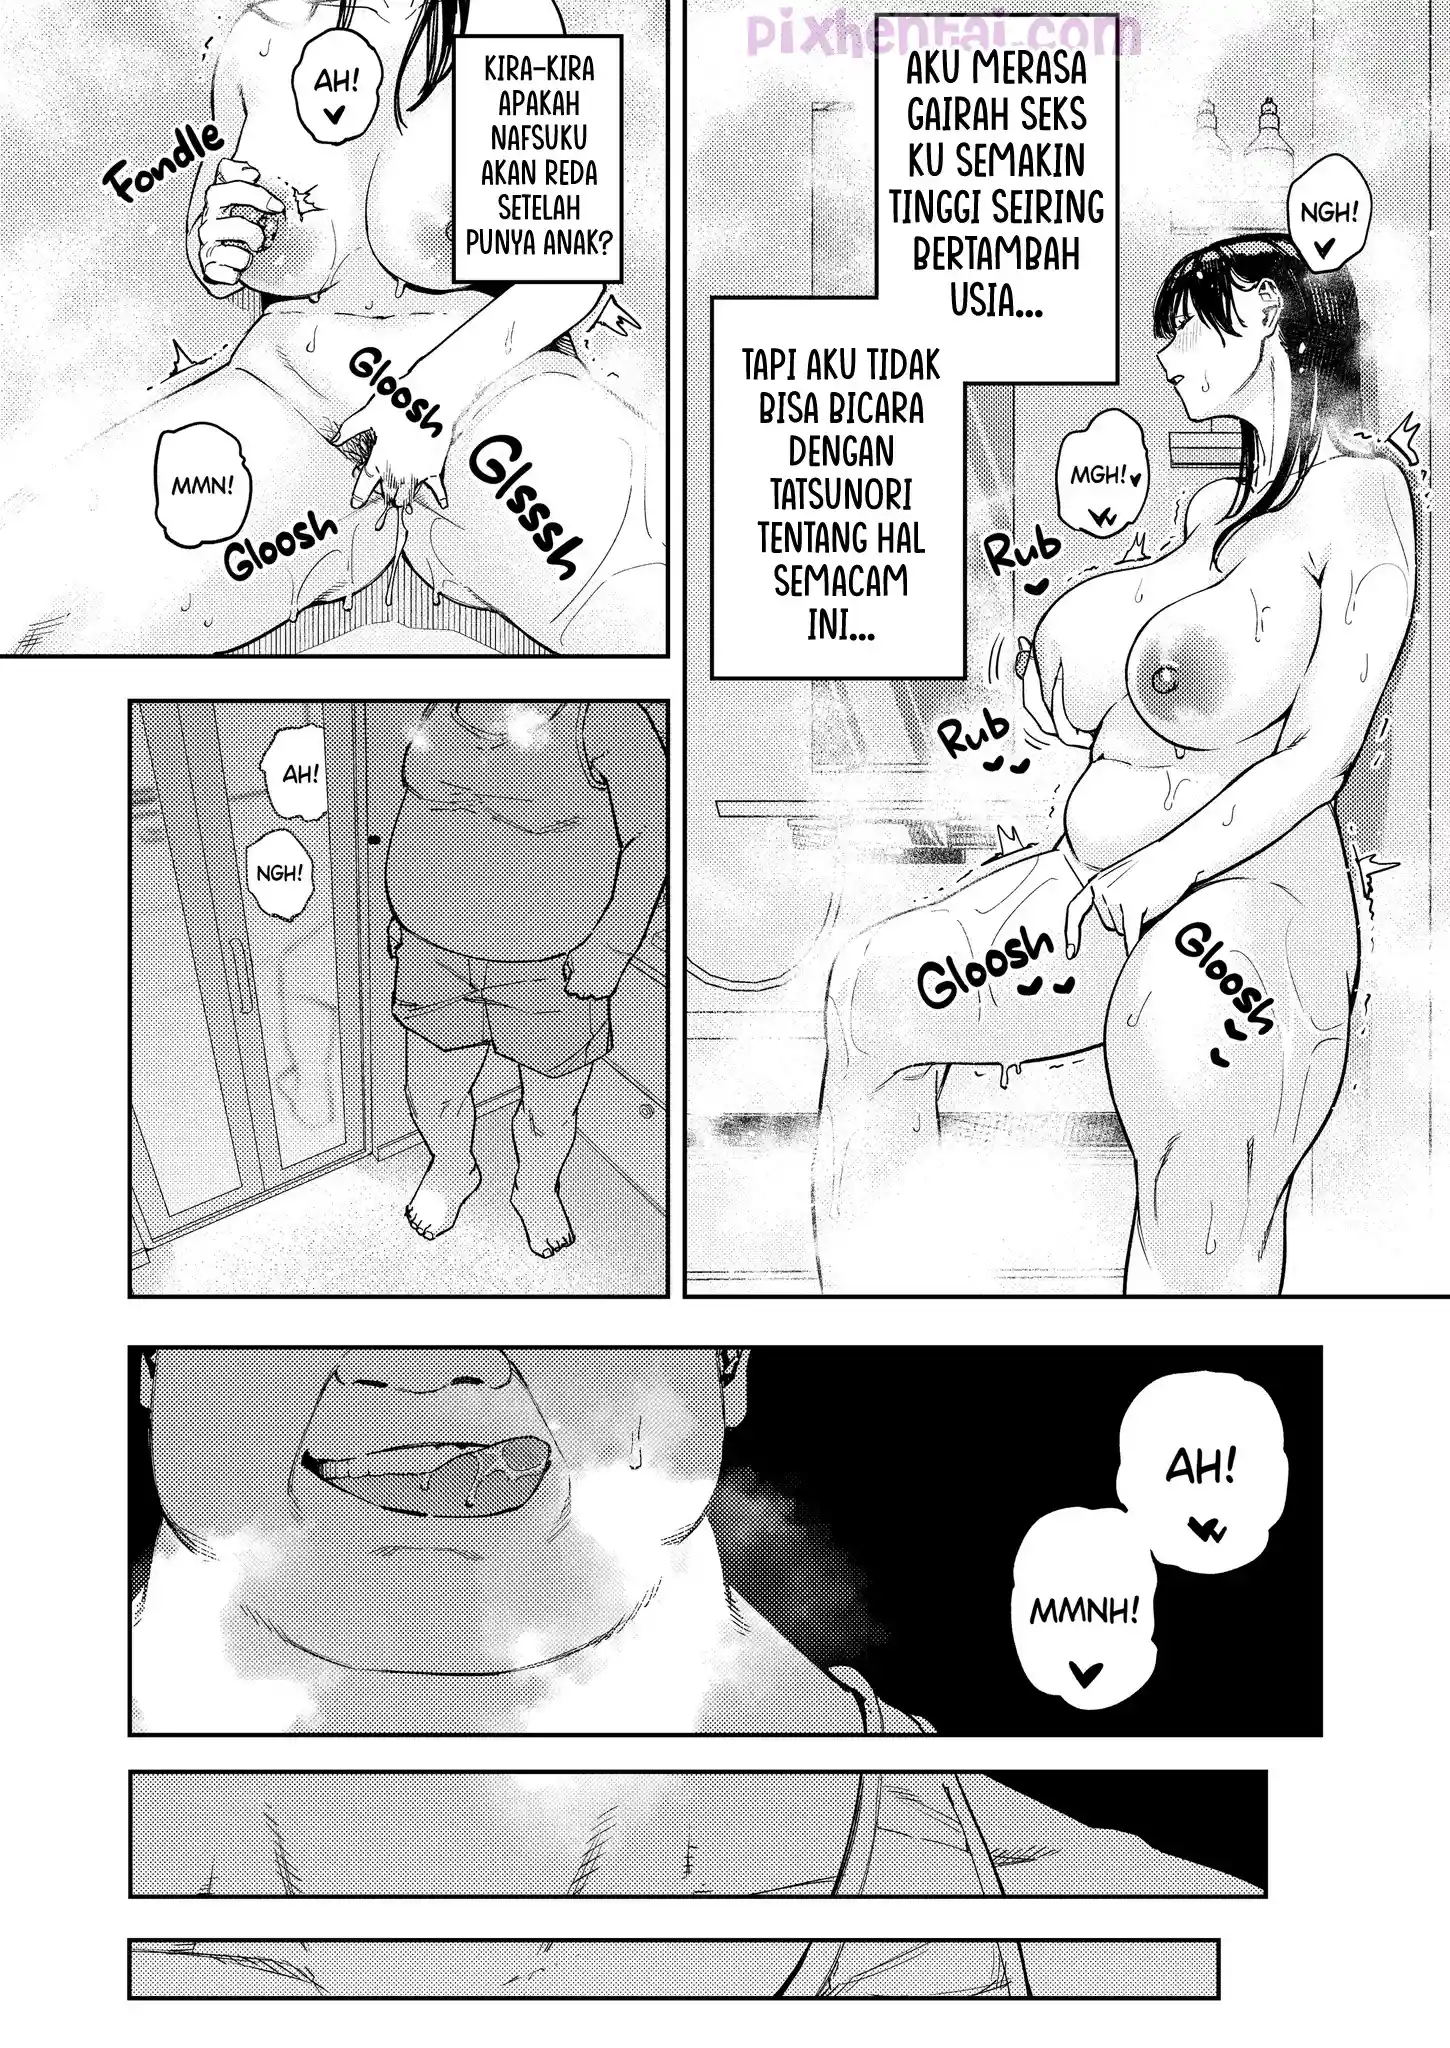 Komik hentai xxx manga sex bokep Screwed by Step-Dad All About Yui 1 11